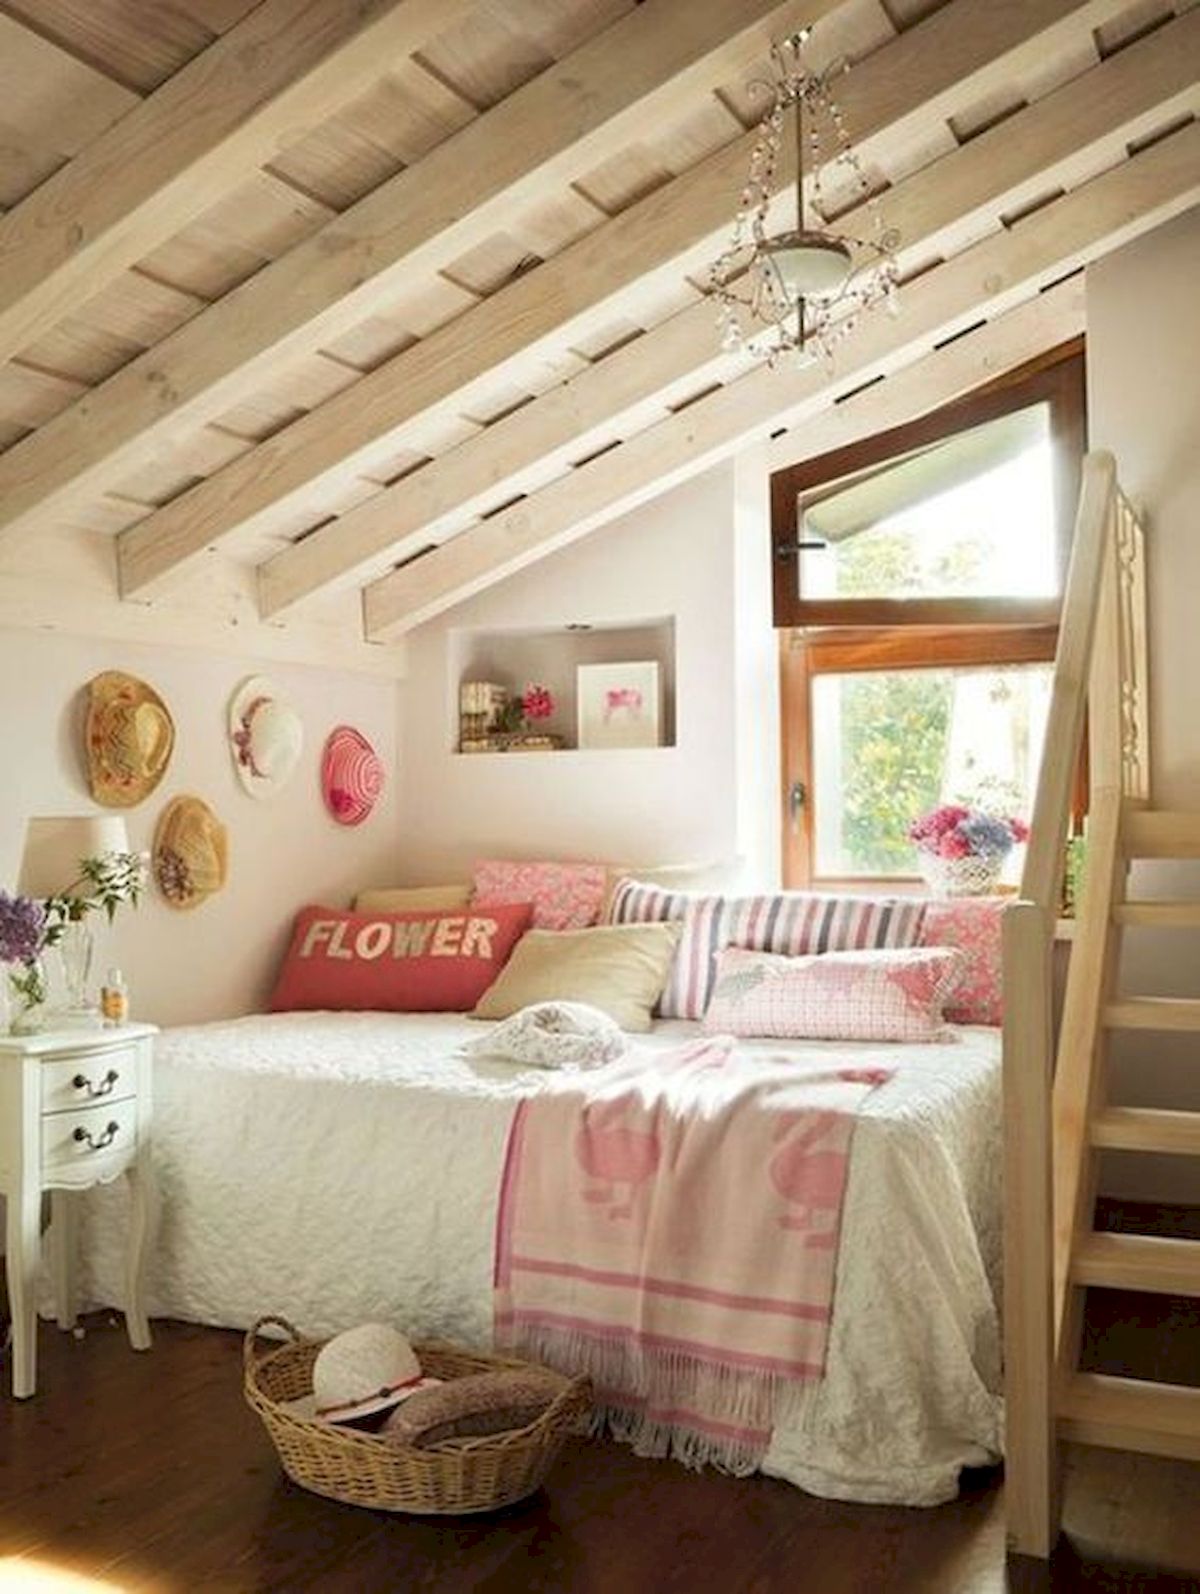 40 Awesome Attic Bedroom Design and Decorating Ideas (13)